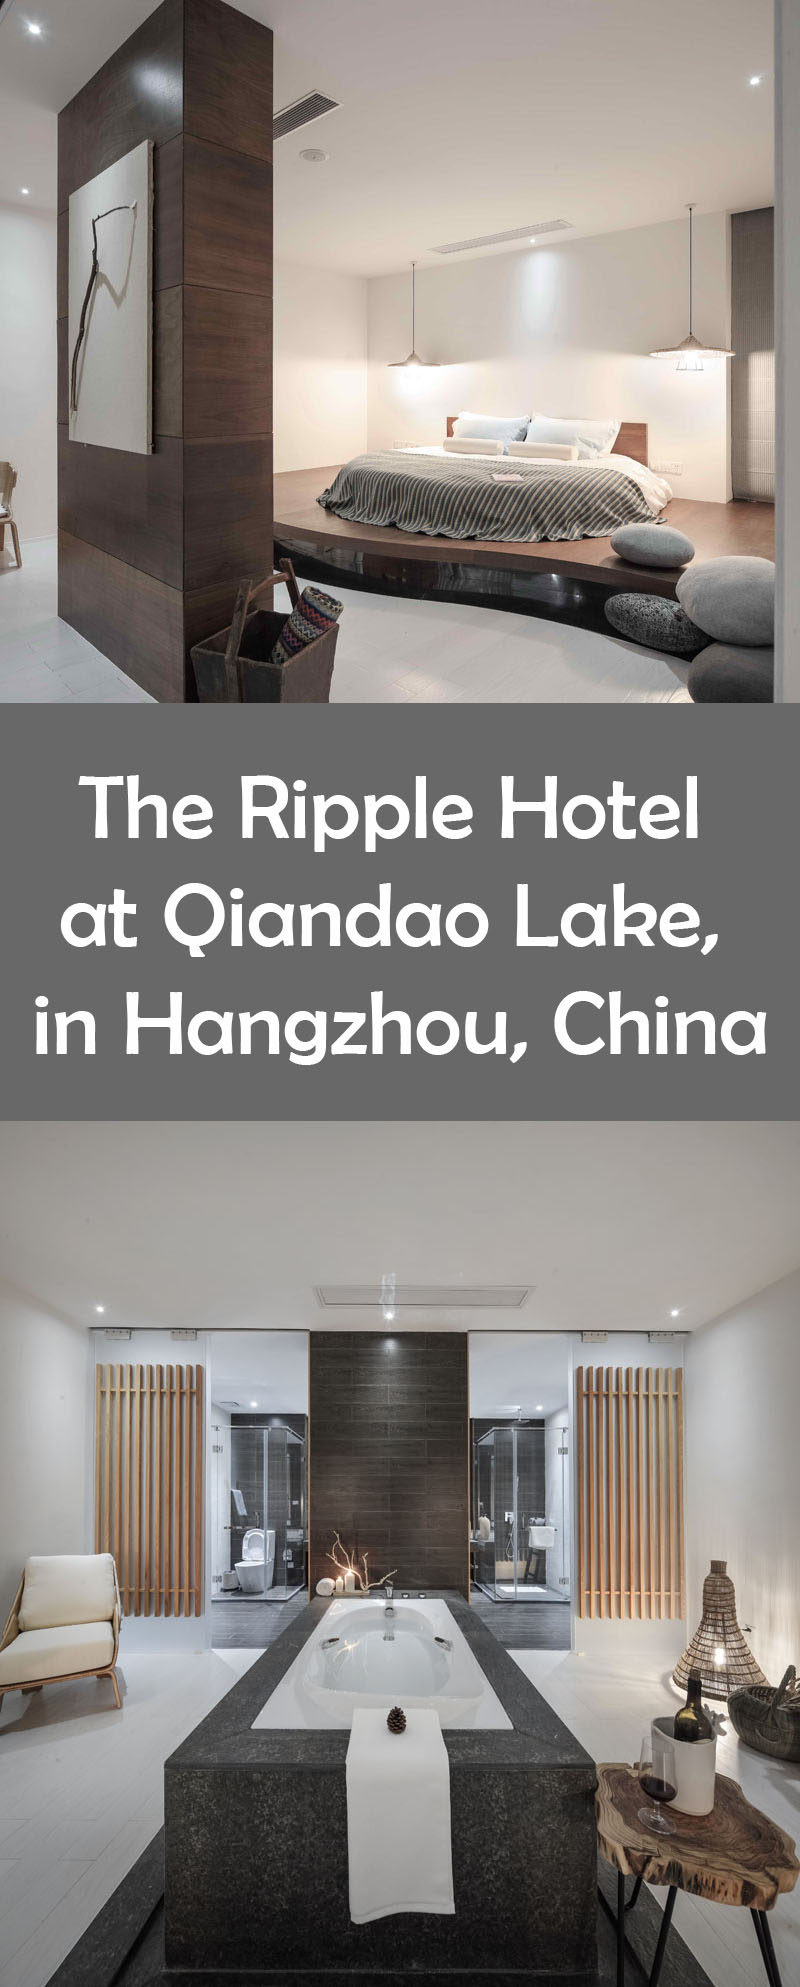 23 Pictures Of The Ripple Hotel At Qiandao Lake, In Hangzhou, China